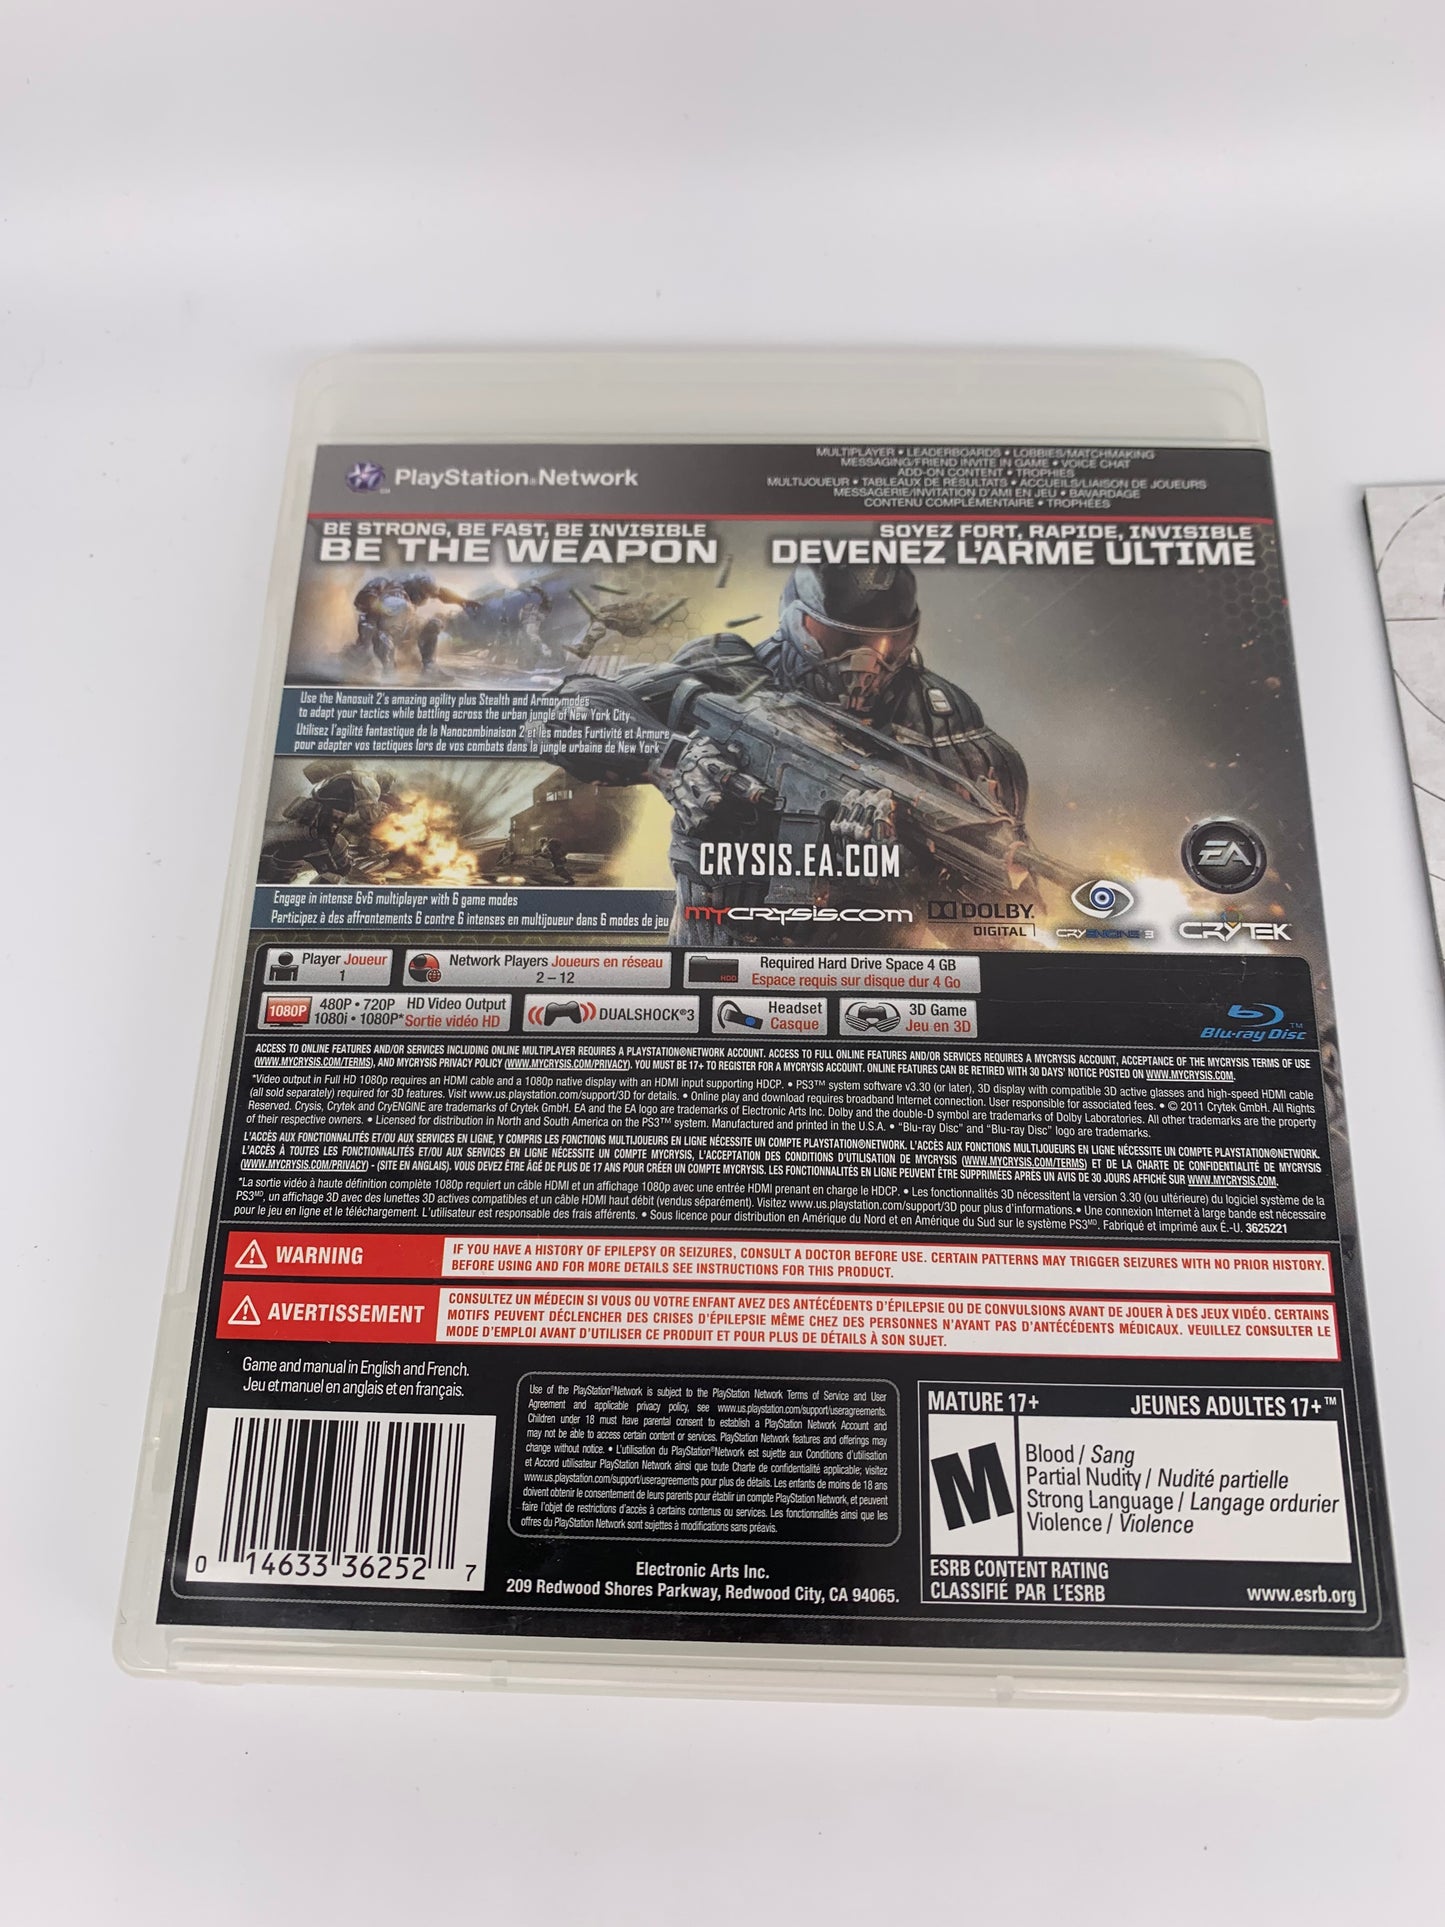 SONY PLAYSTATiON 3 [PS3] | CRYSiS 2 | LiMiTED EDiTiON